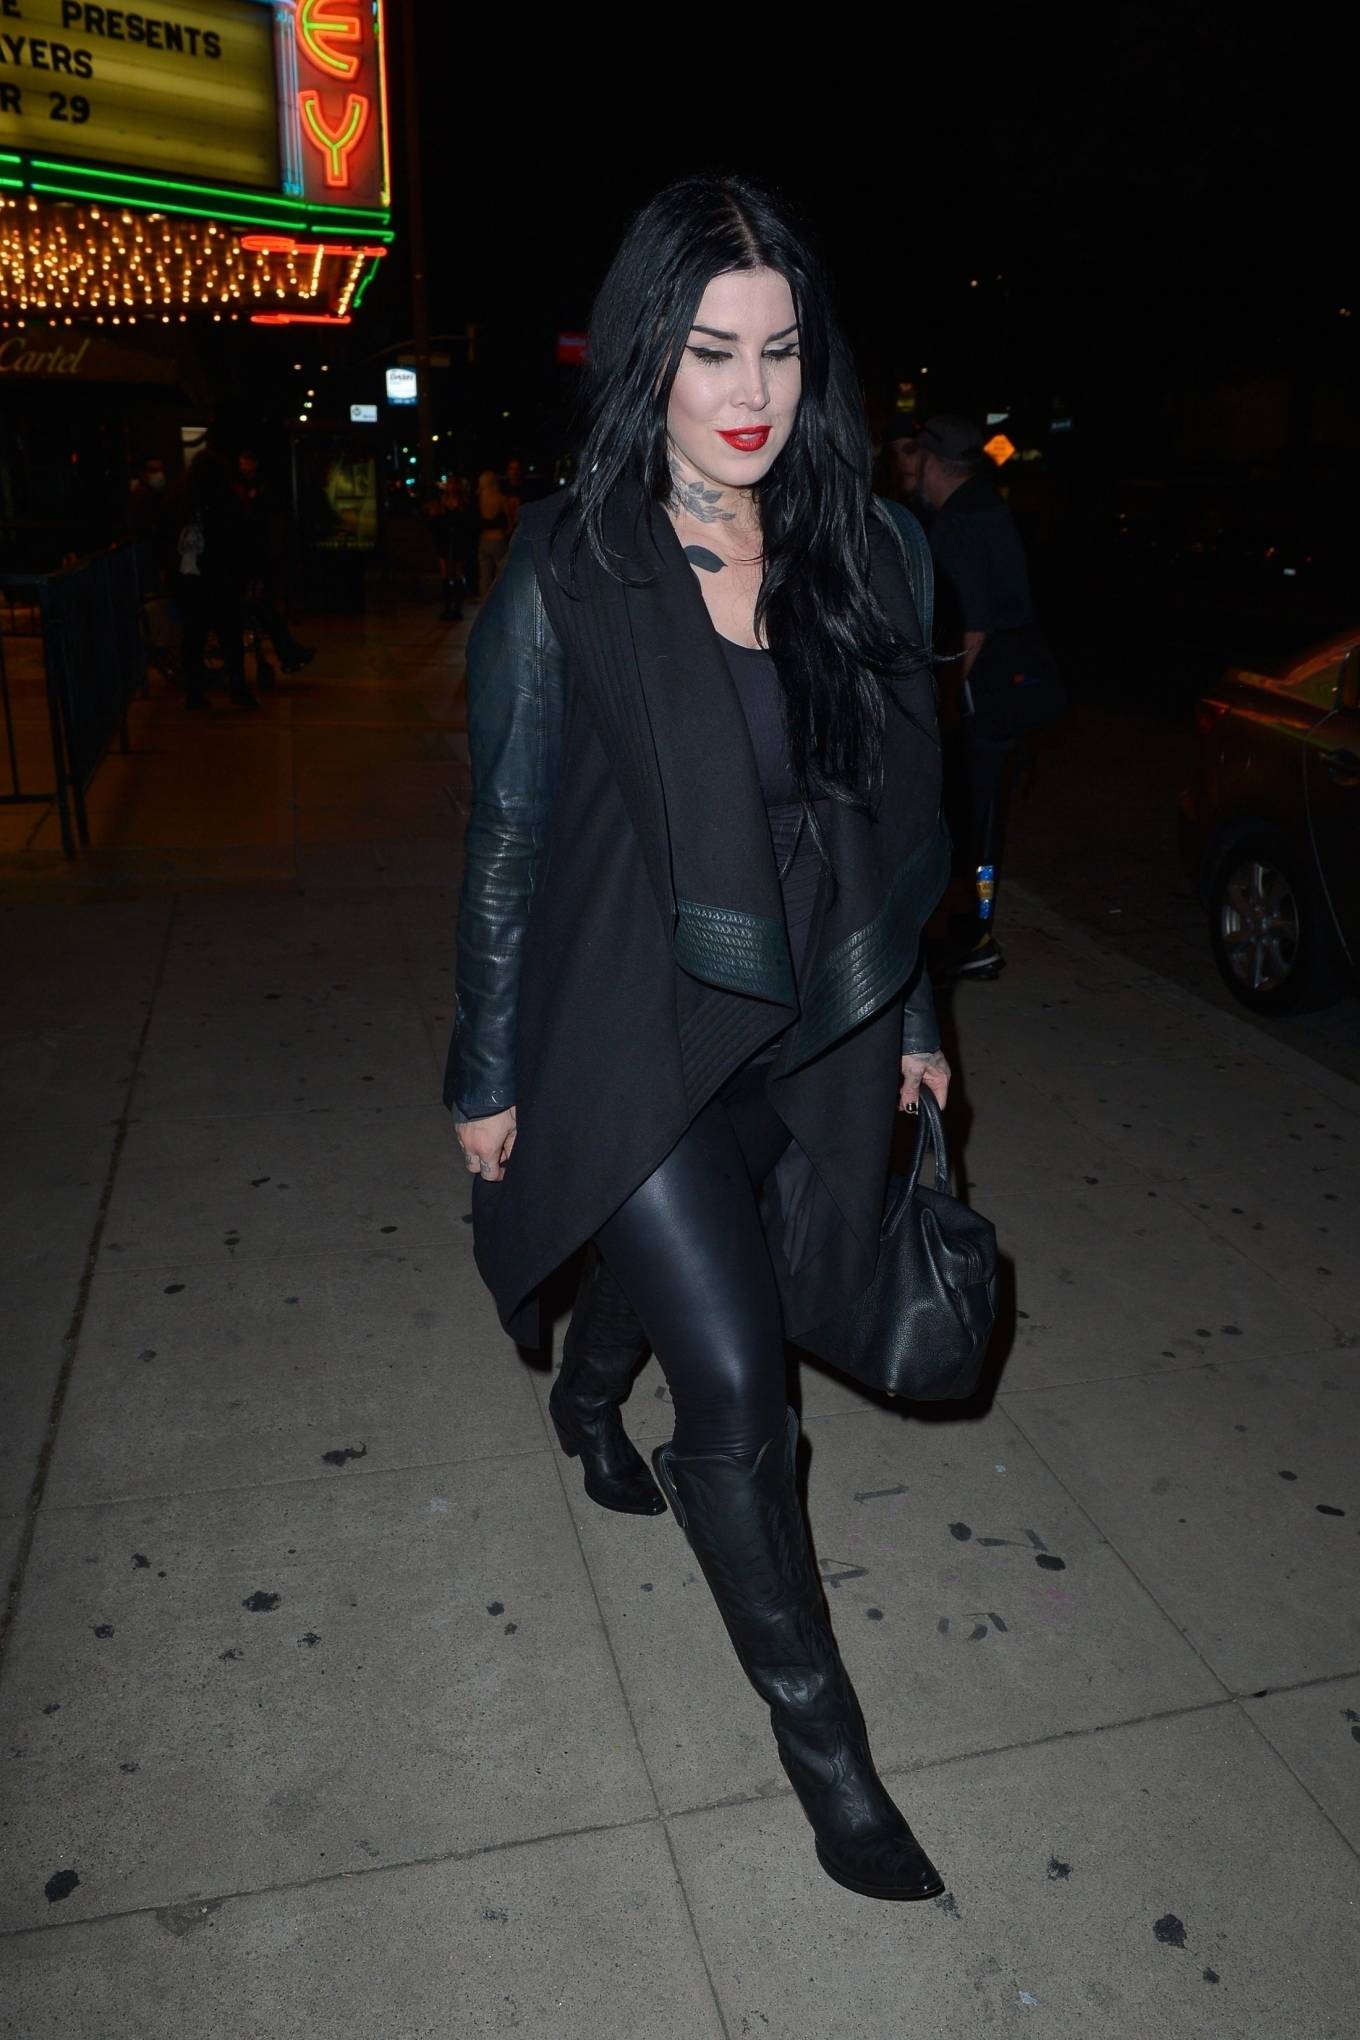 Kat Von D - Arrives for the 'Goldenvoice Presents Prayers' in Los Angeles